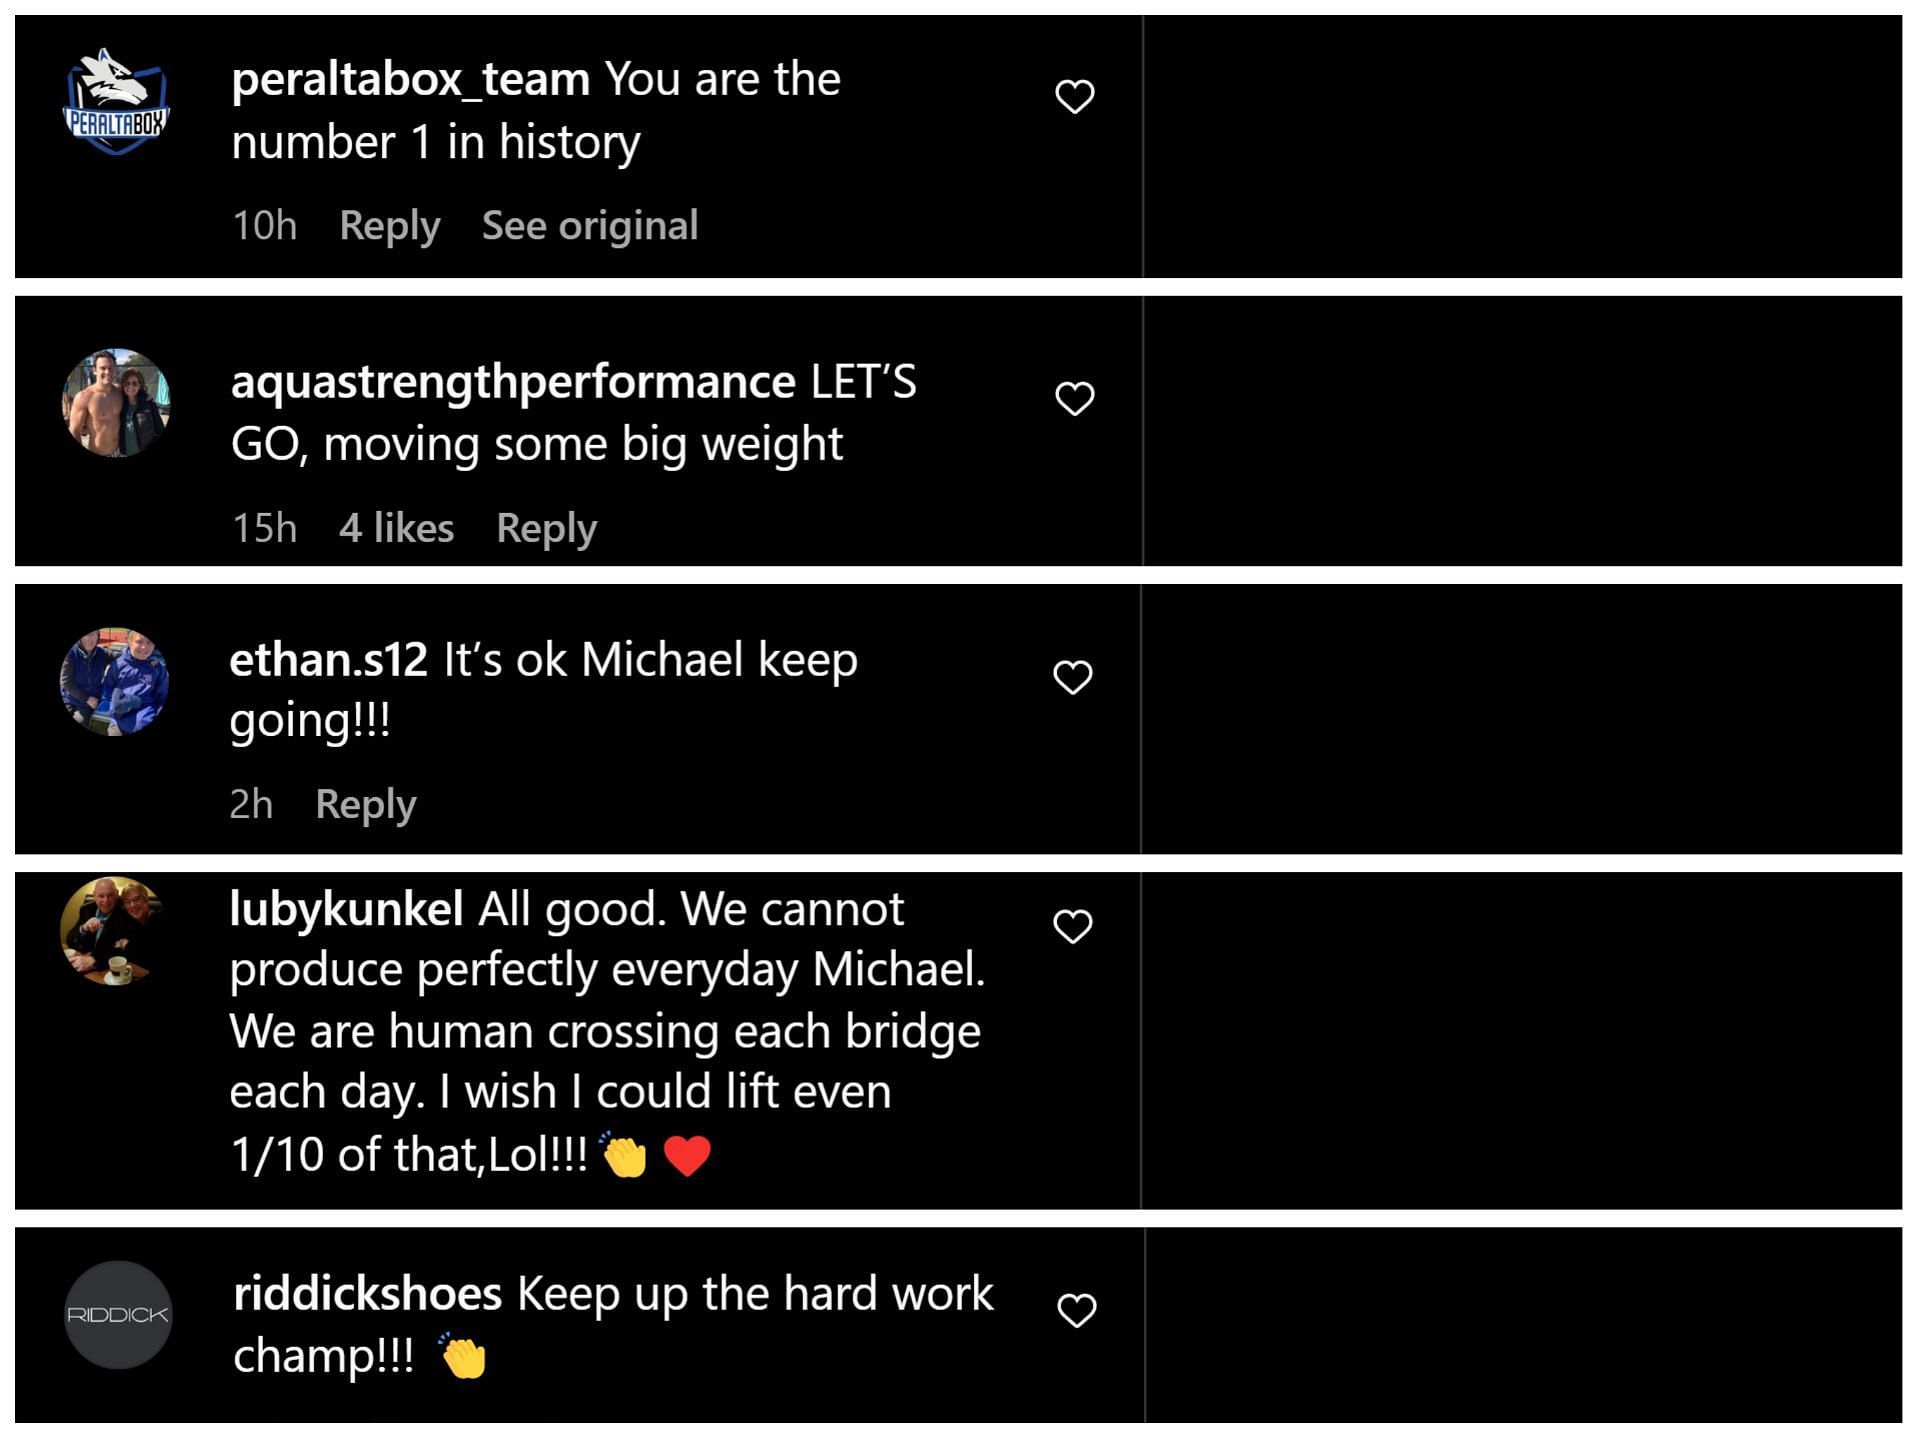 Fans rally in the comments section to encourage Phelps on an Instagram post where Phelps fails to perform a one rep maximum: Image via Instagram (@m_phelps00)